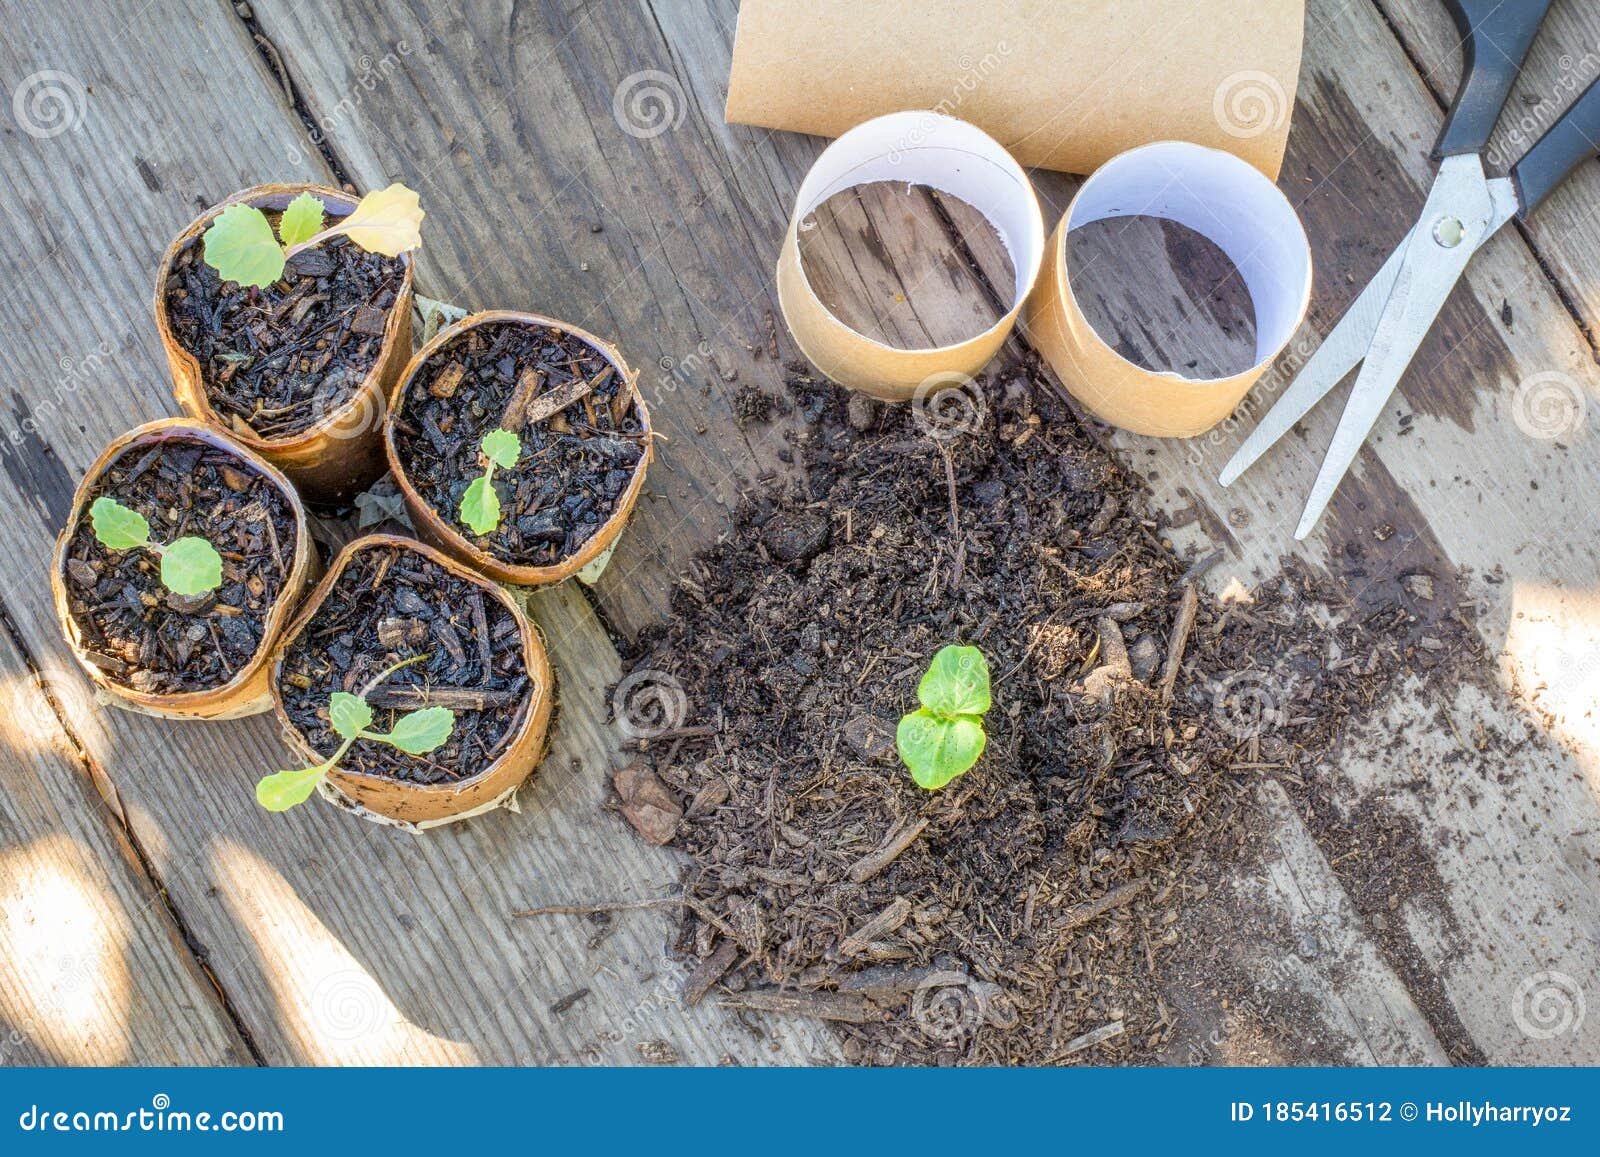 top view of toilet paper roll tubes being recycled as a seedling planters, post toilet roll hoarding